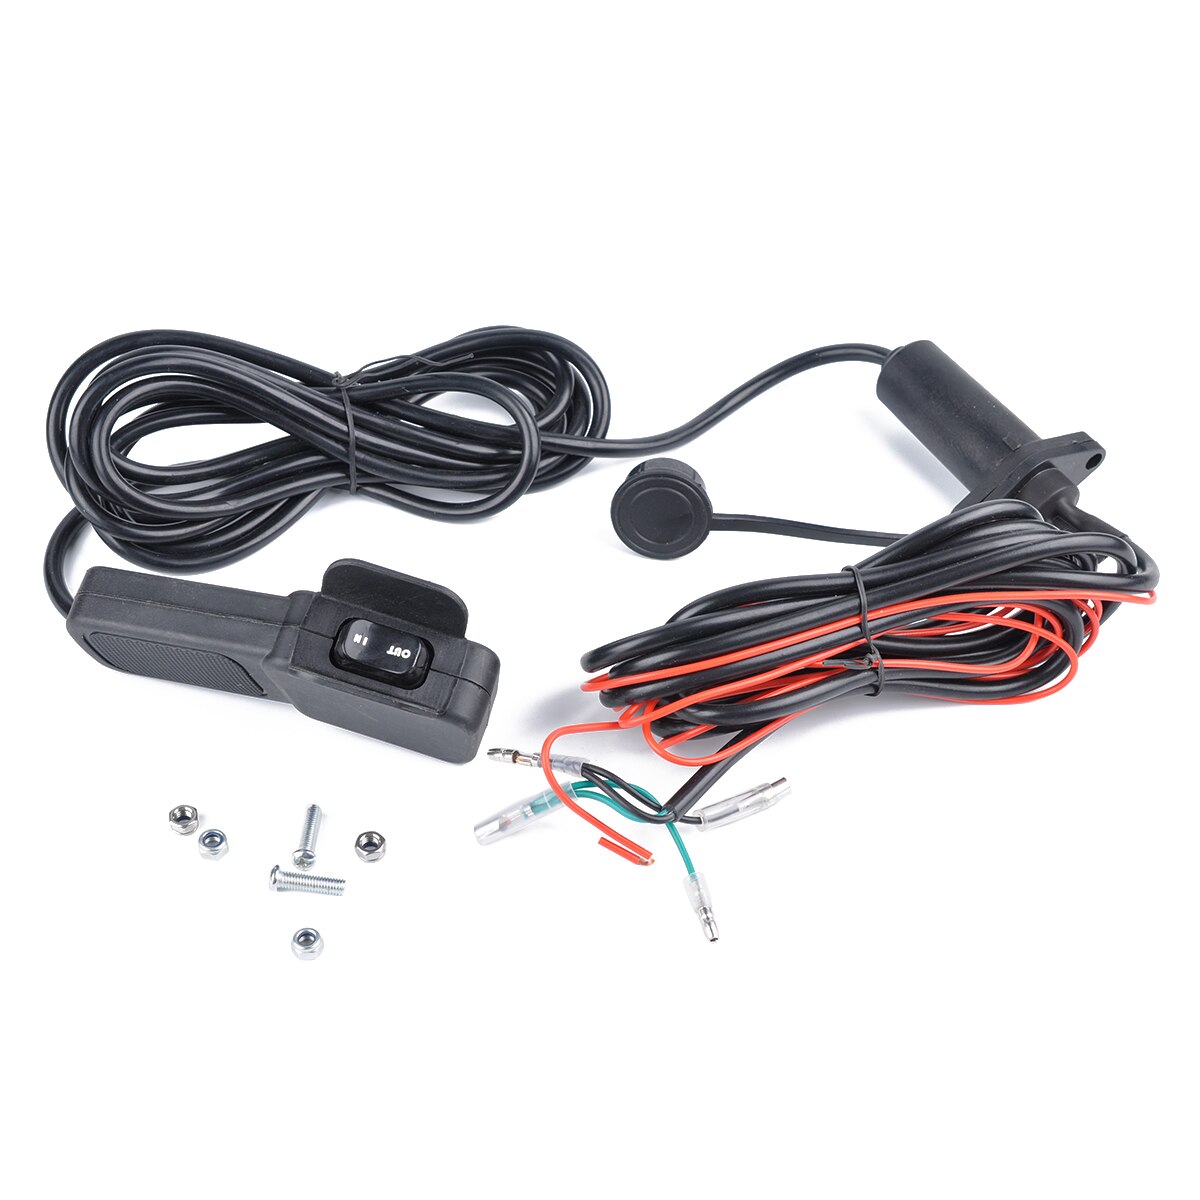 12-24V ATV Winch Electric Winch Accessories Handle Switch Line Control System